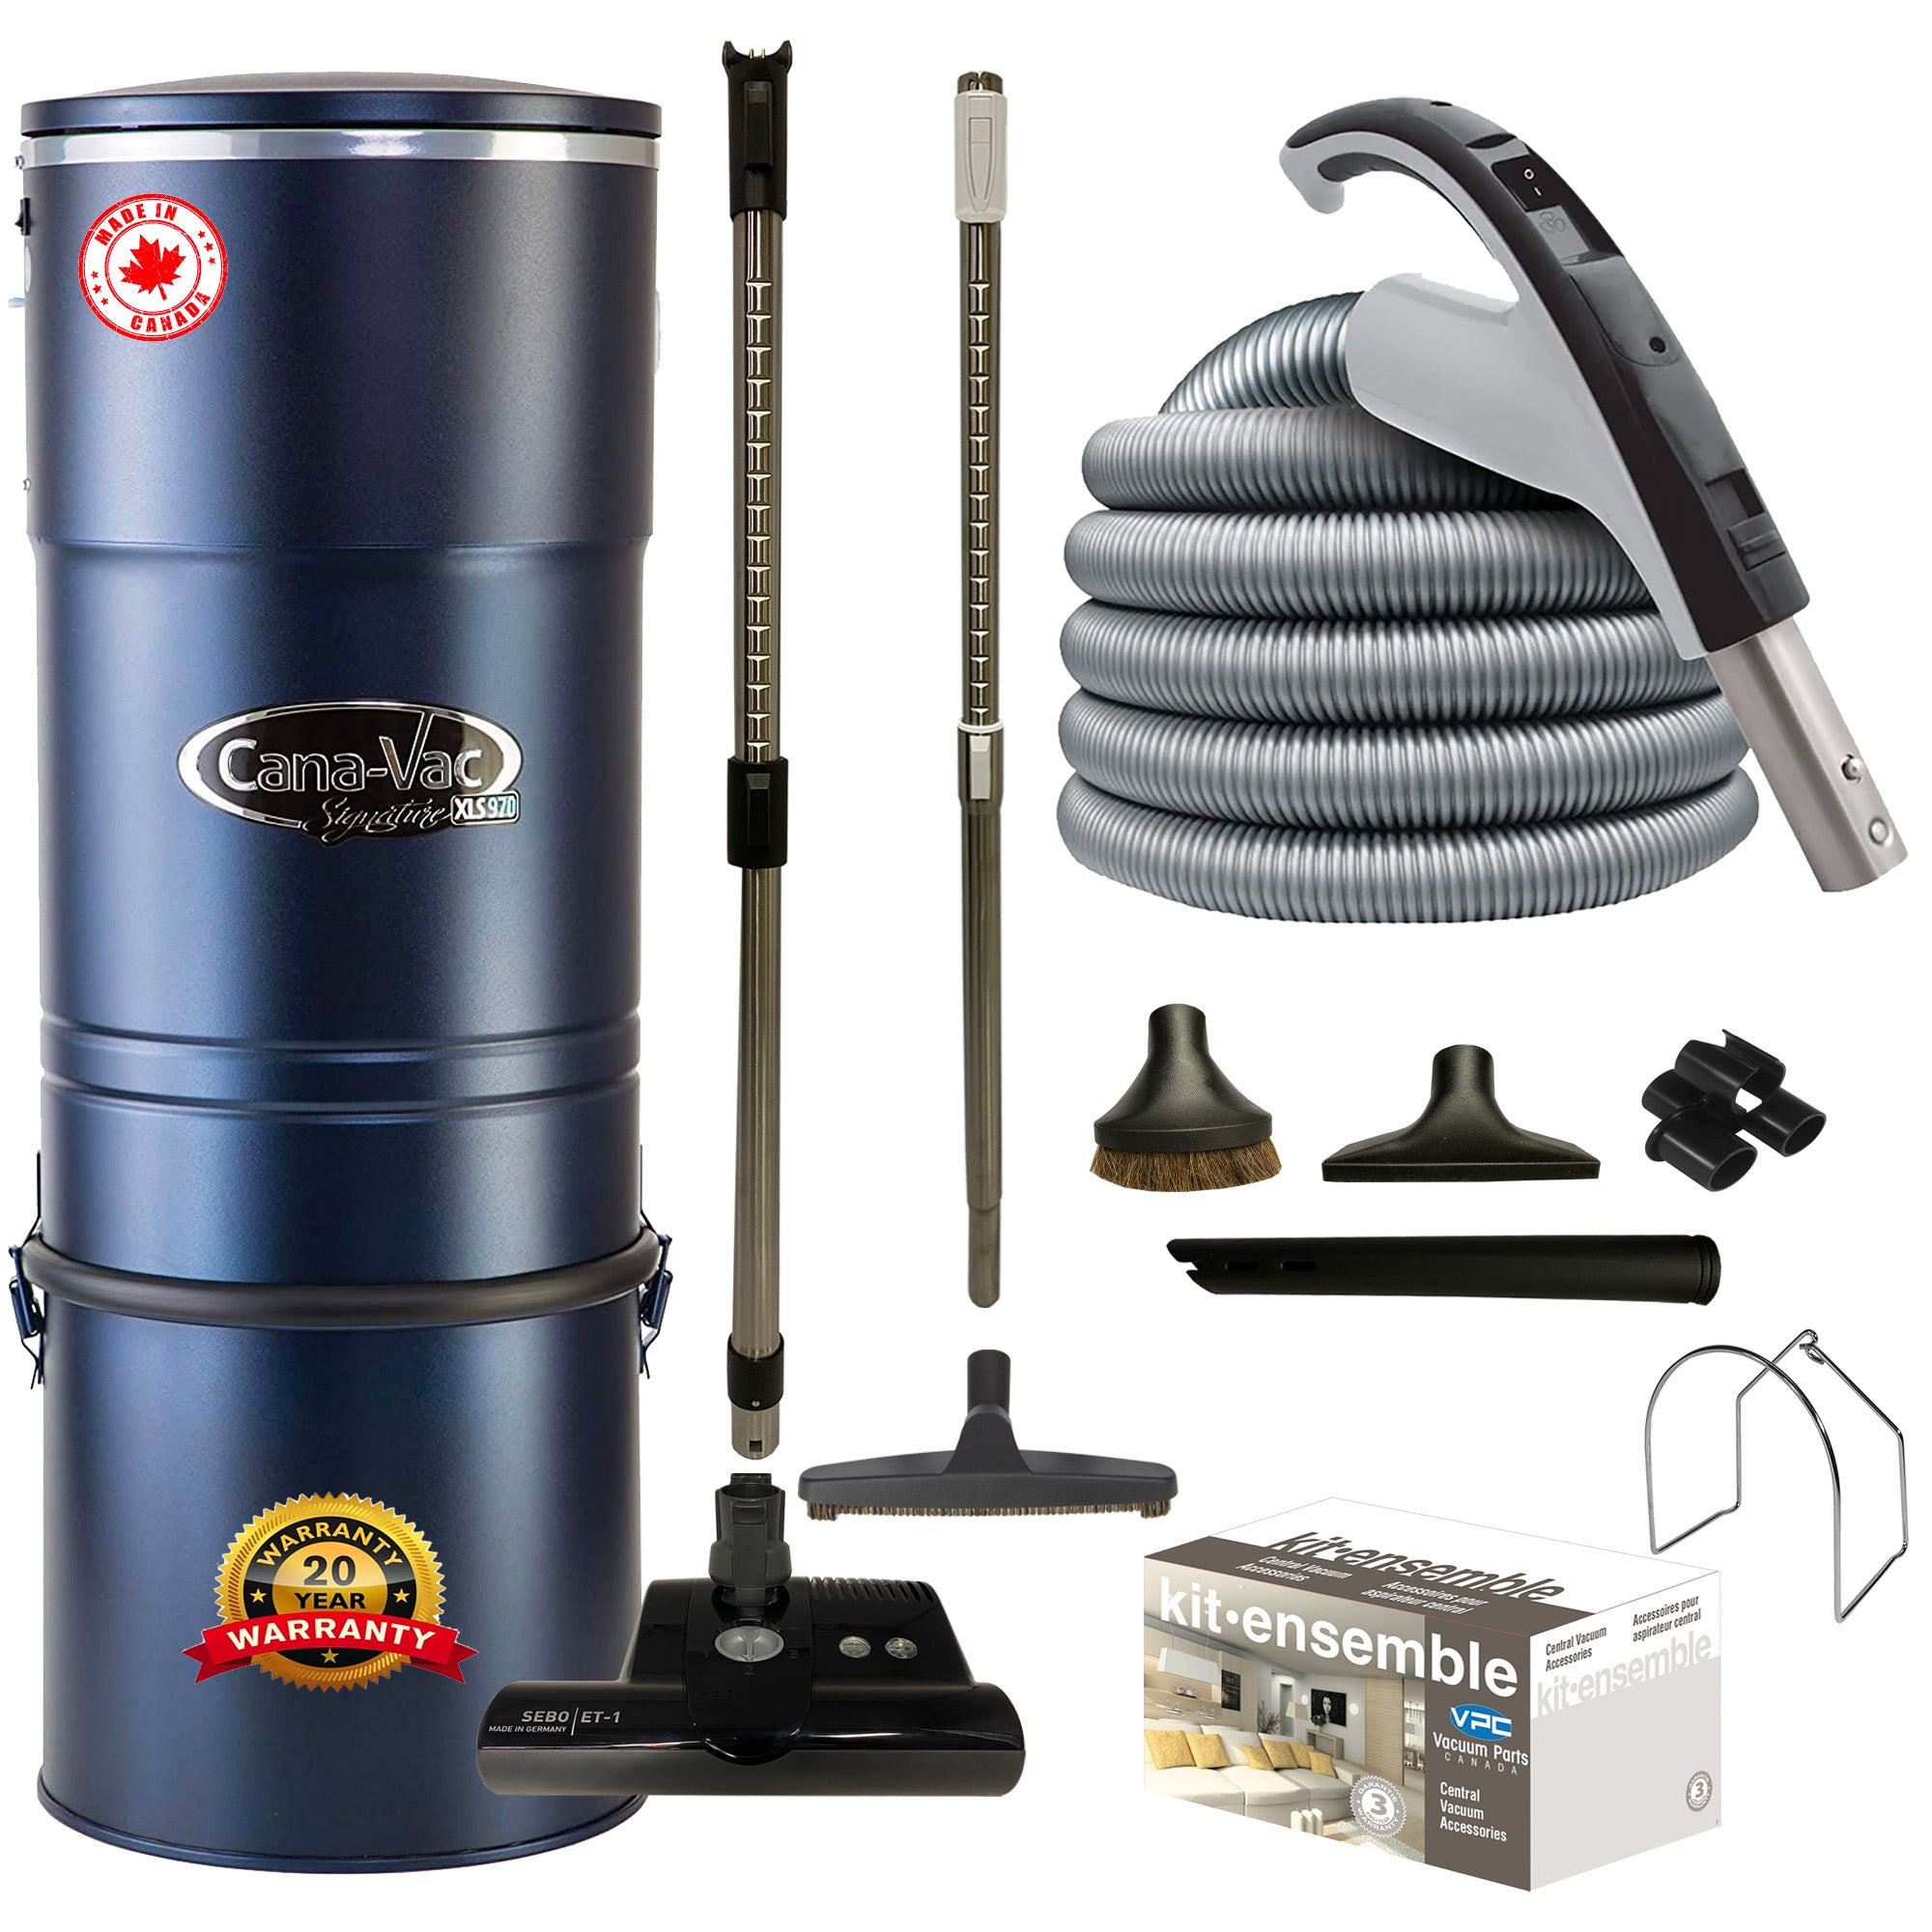 CanaVac XLS990 Central Vacuum Cleaner with Premium Electric Package